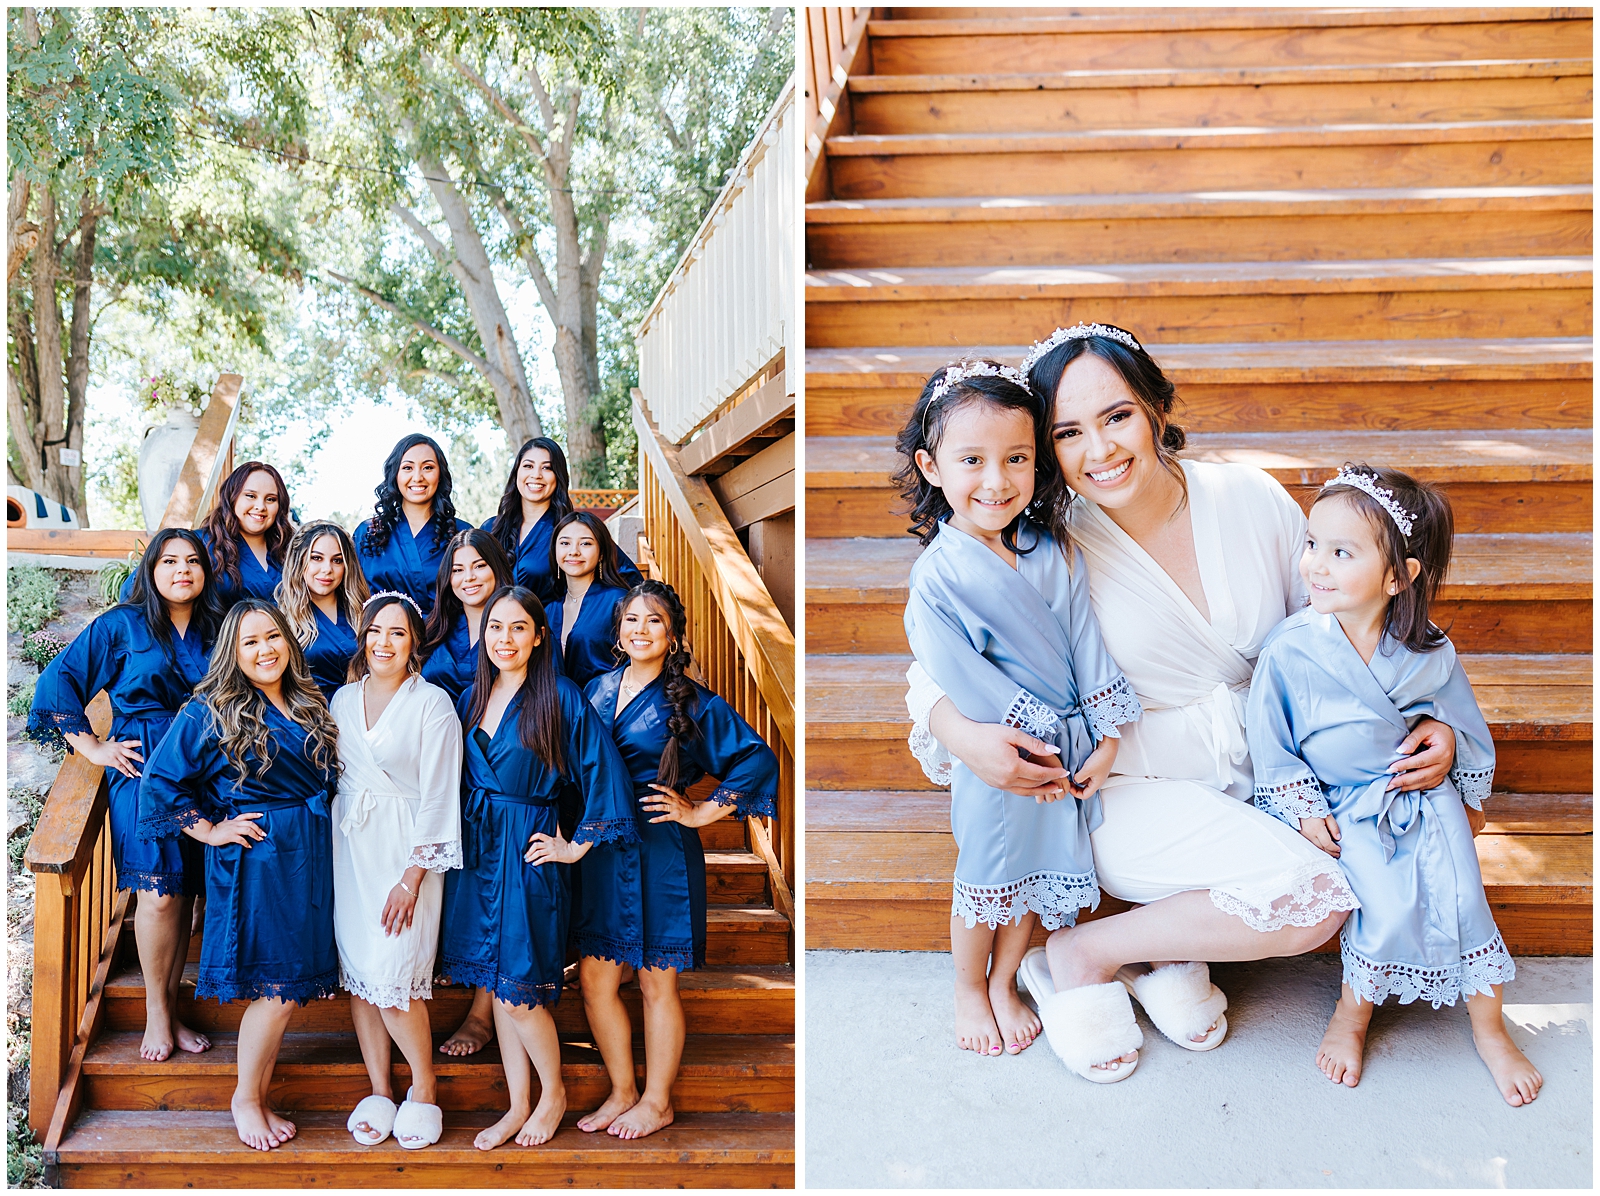 Bridesmaids in Matching Navy Robes with Custom Monograms and Flower Girls